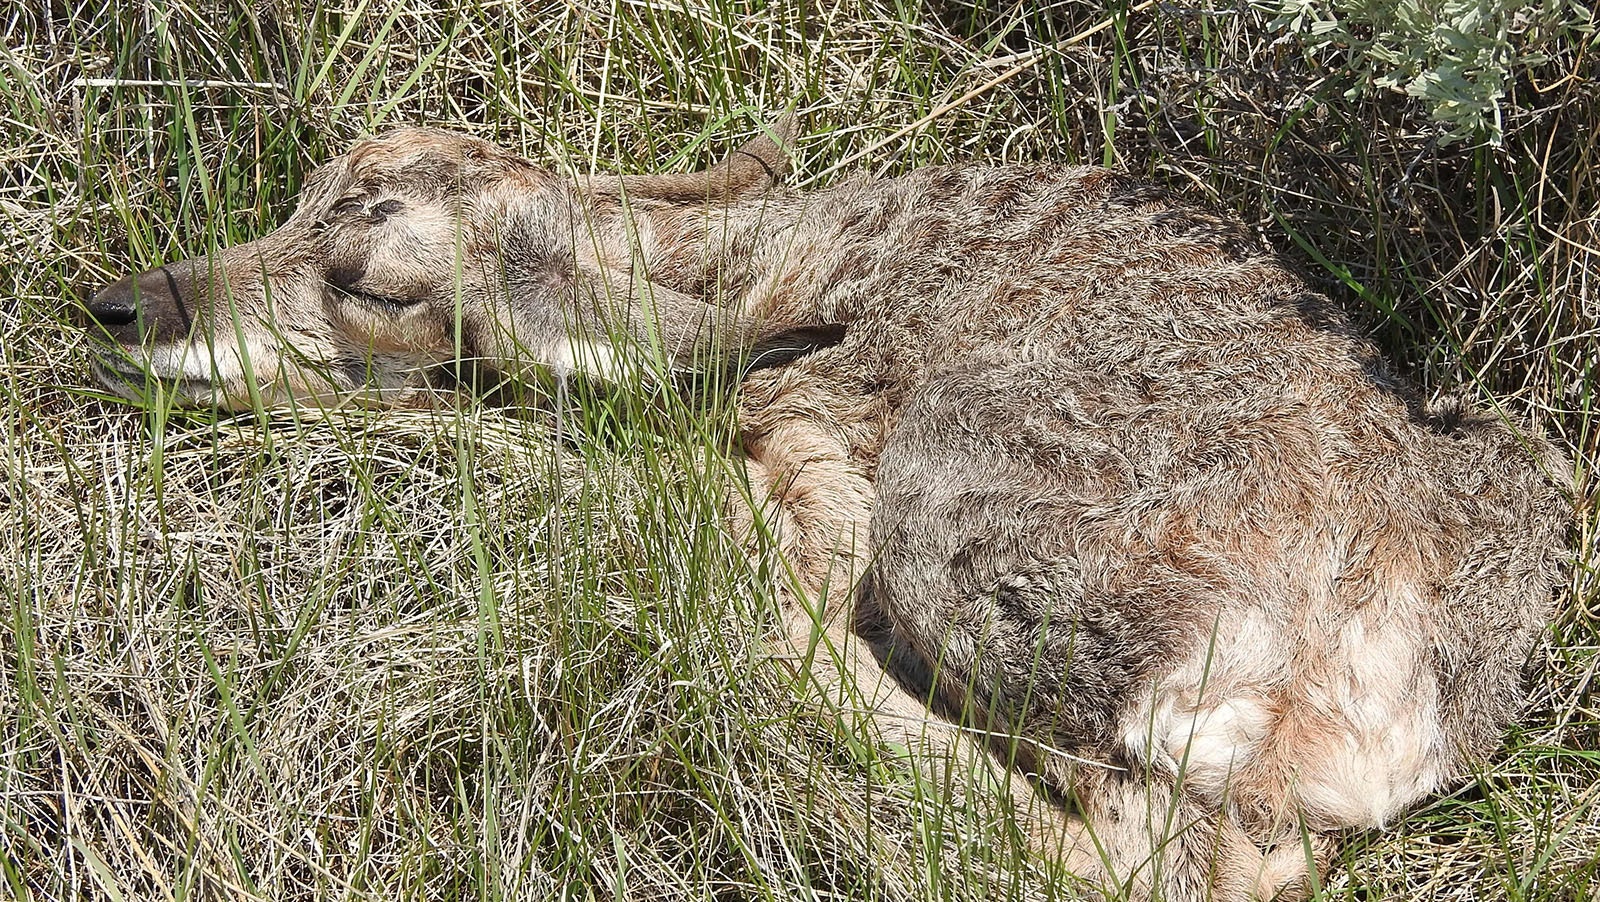 Stan Cannon found this sleeping newborn antelope fawn last spring on his family’s property near Squaretop Mountain in Sublette County. This year, he said there are no doe of fawn antelope there.